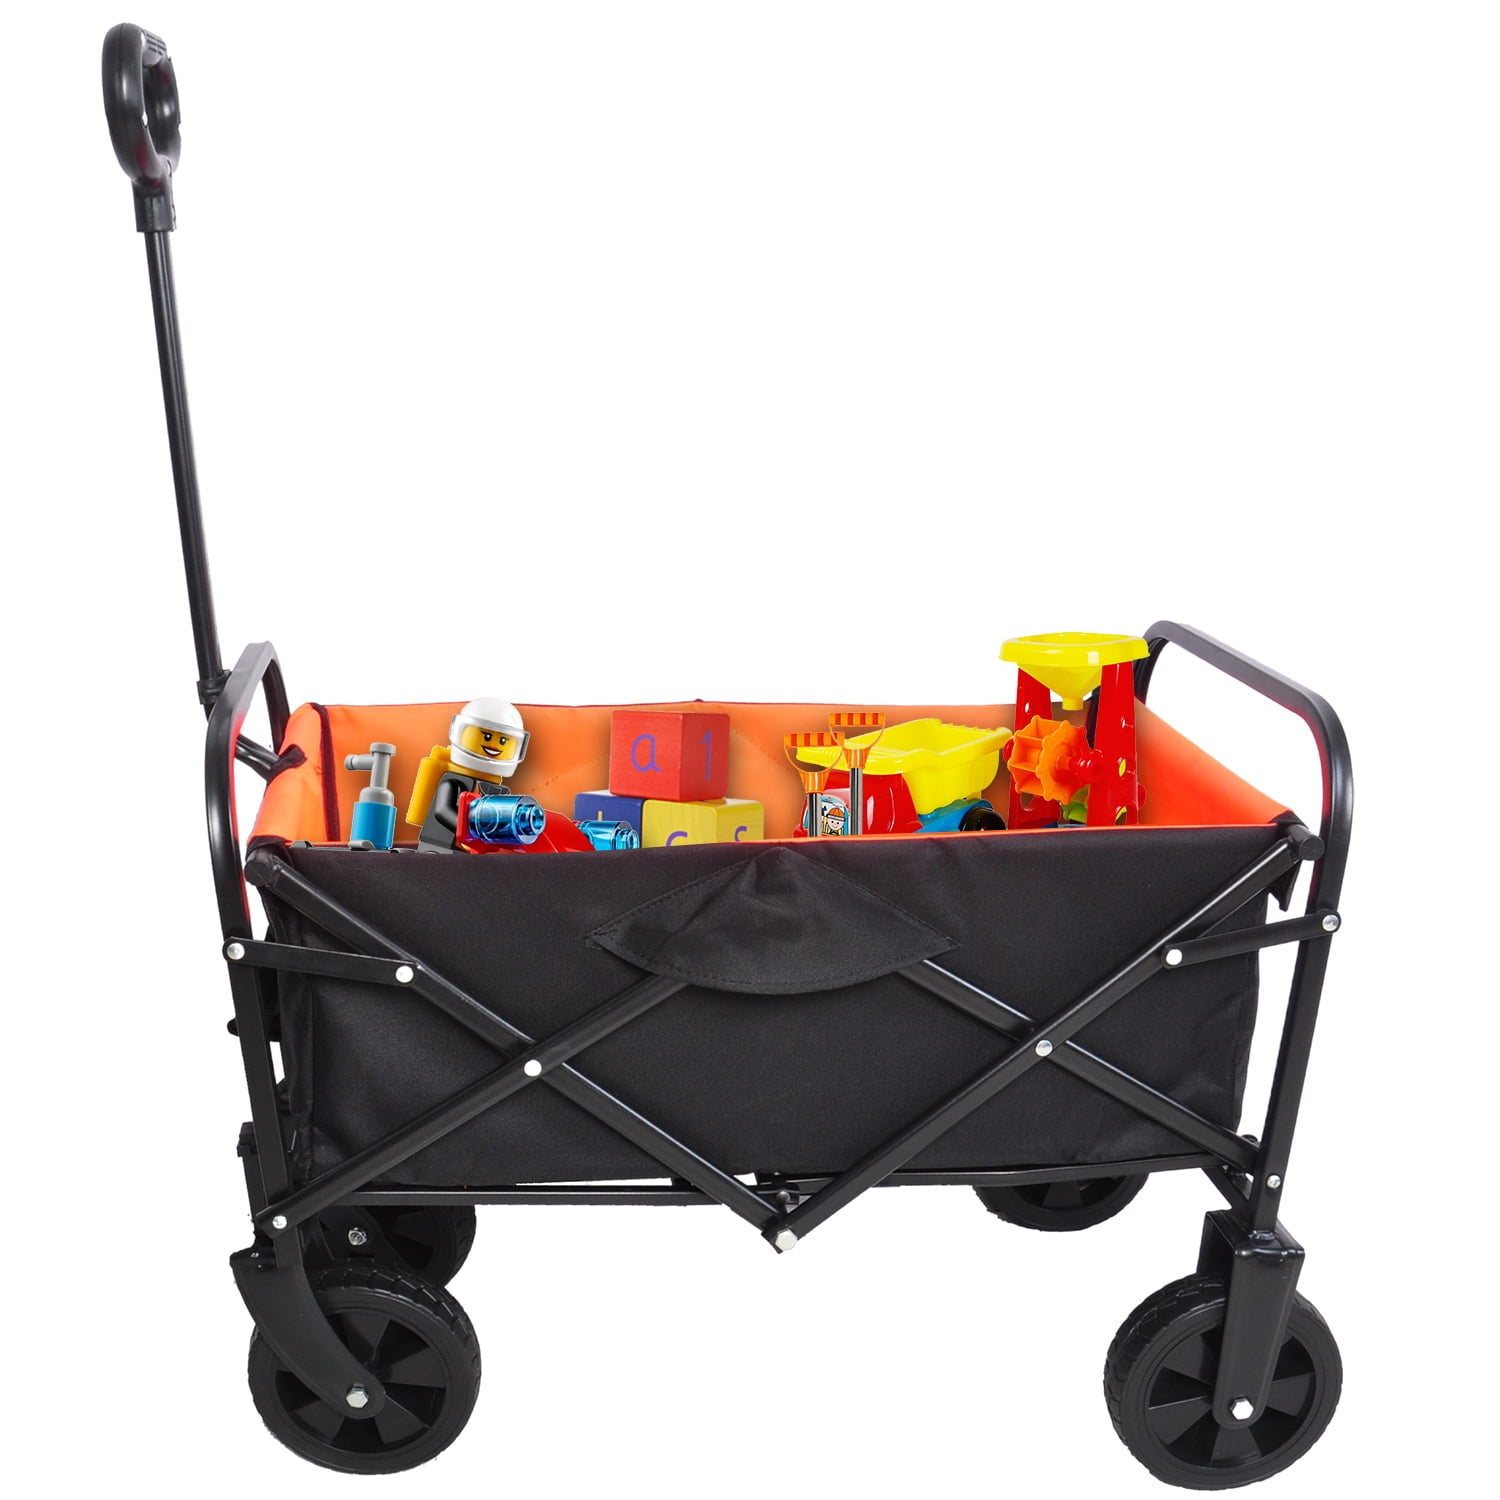 Details about   Macwagon Folding Wagon with Beverage Tray 